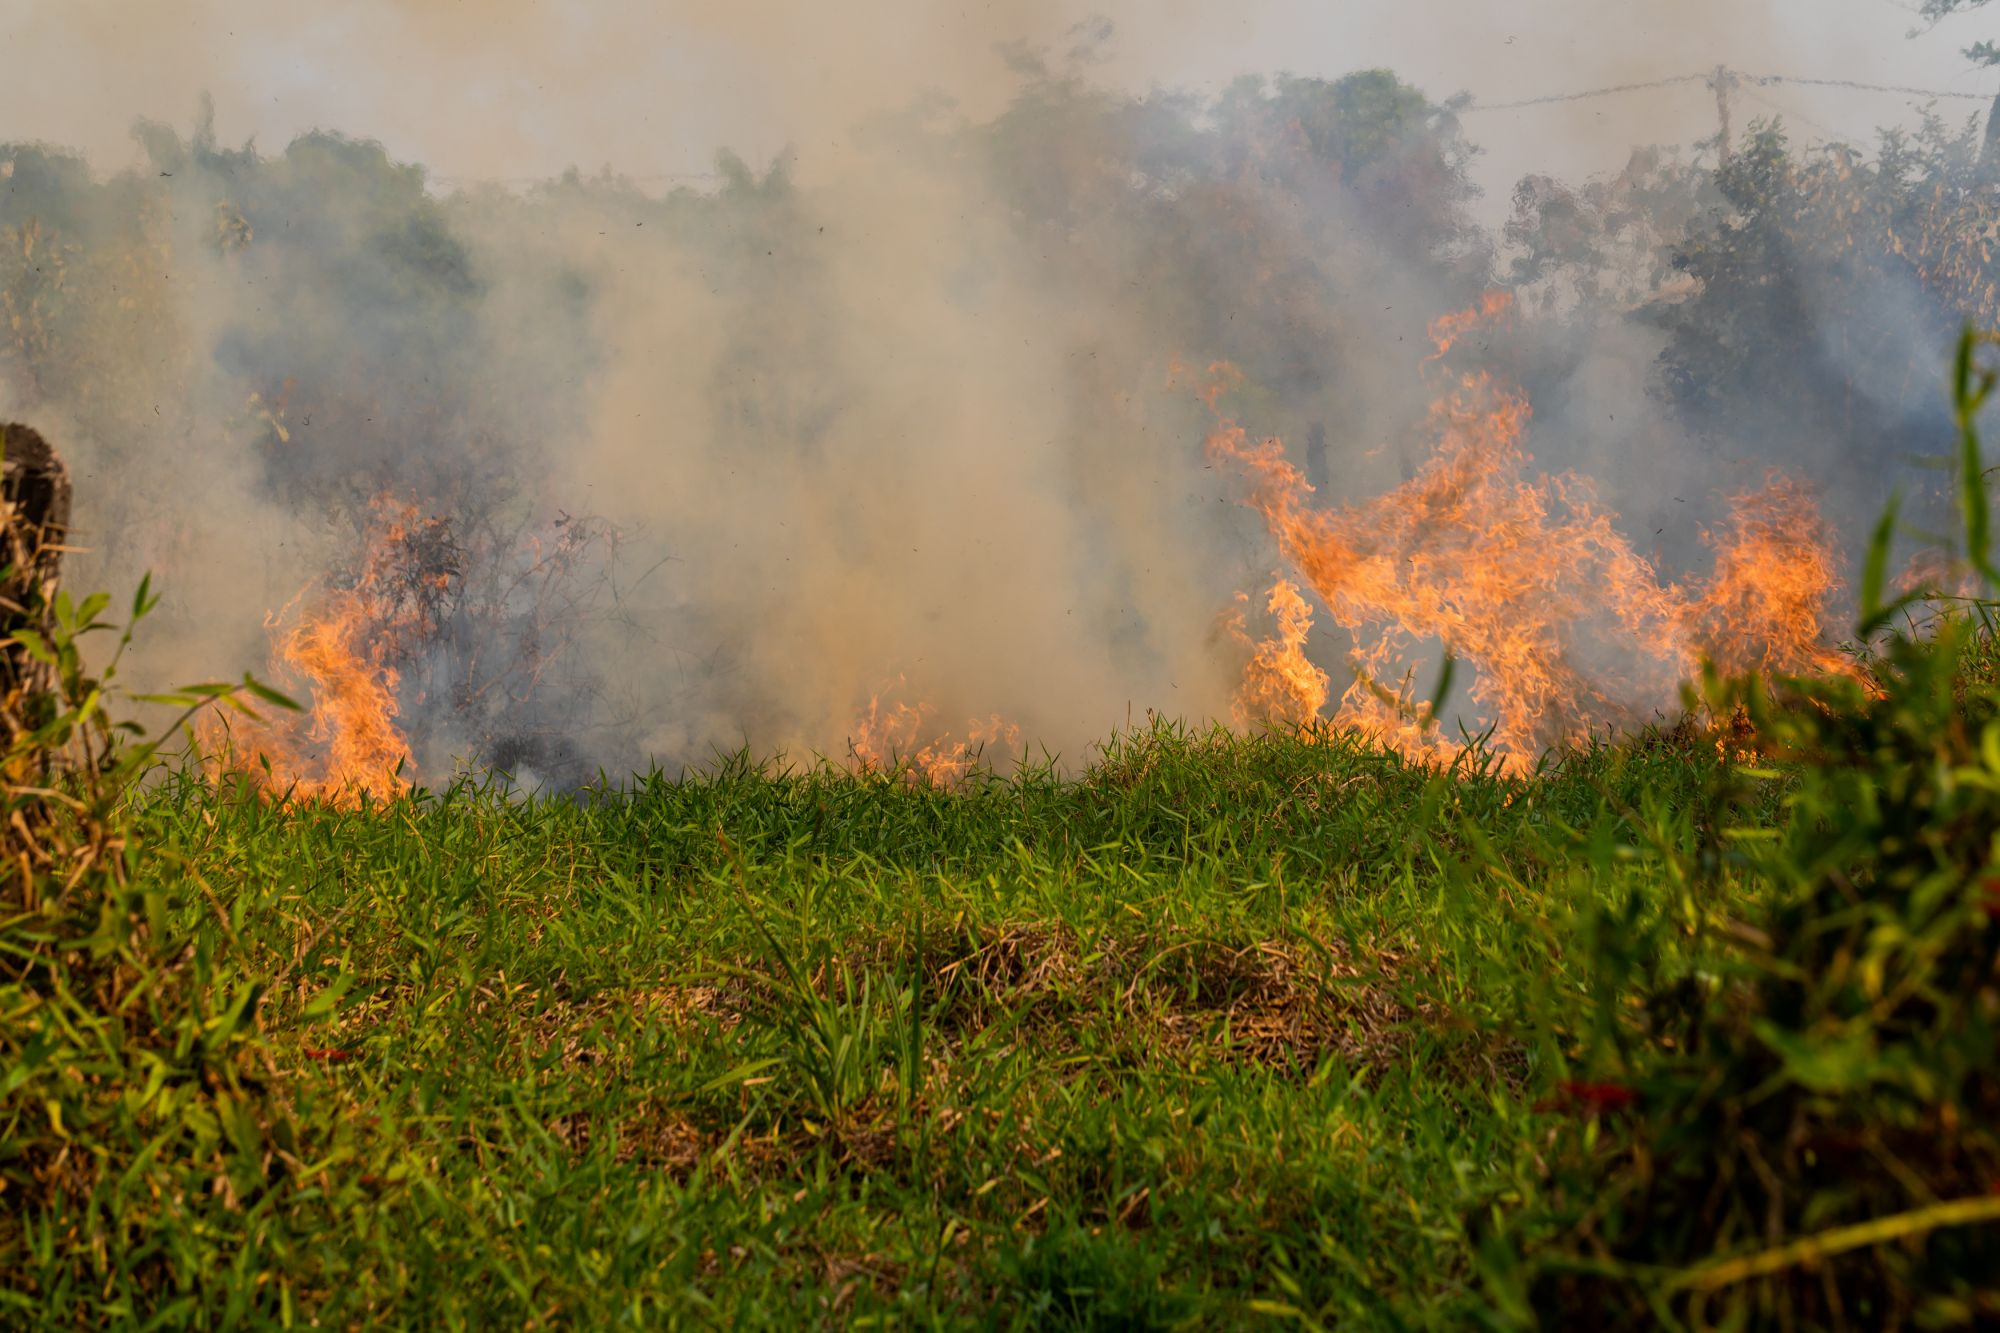 Brazil’s Amazon rainforest in flames in 2019, burning at the highest rate since 2013. There have been 72,843 fires reported in Brazil since the beginning of the year. Credit Line: Noelly Castro/World Animal Protection